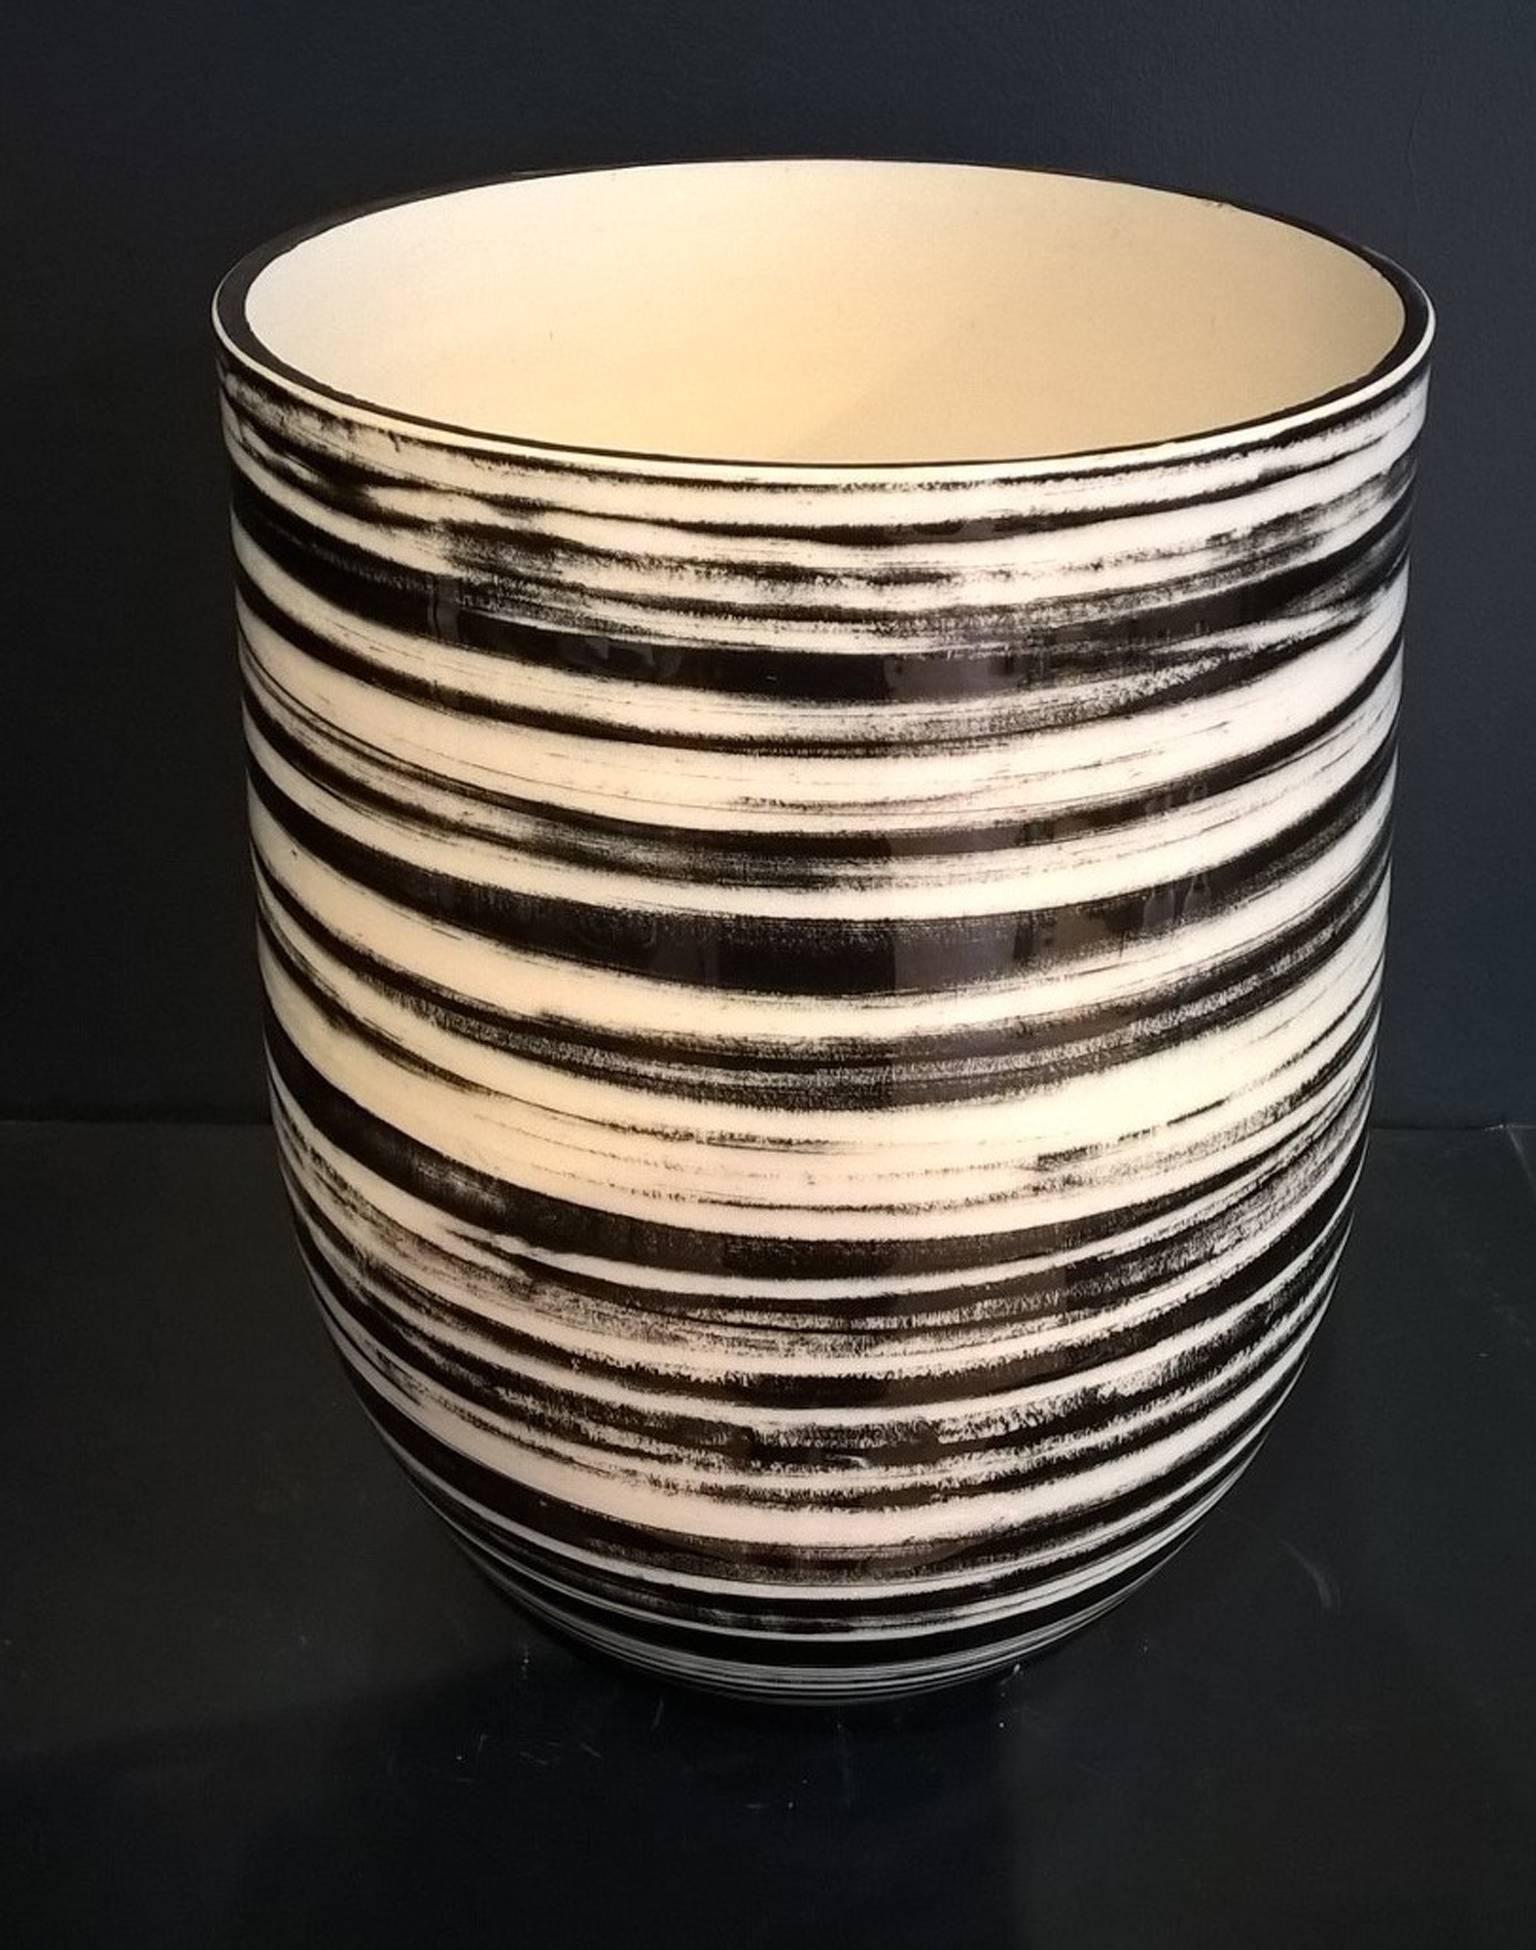 French Contemporary 2016 Black and White Glazed Vase, One-of-a-Kind, Karen Swami